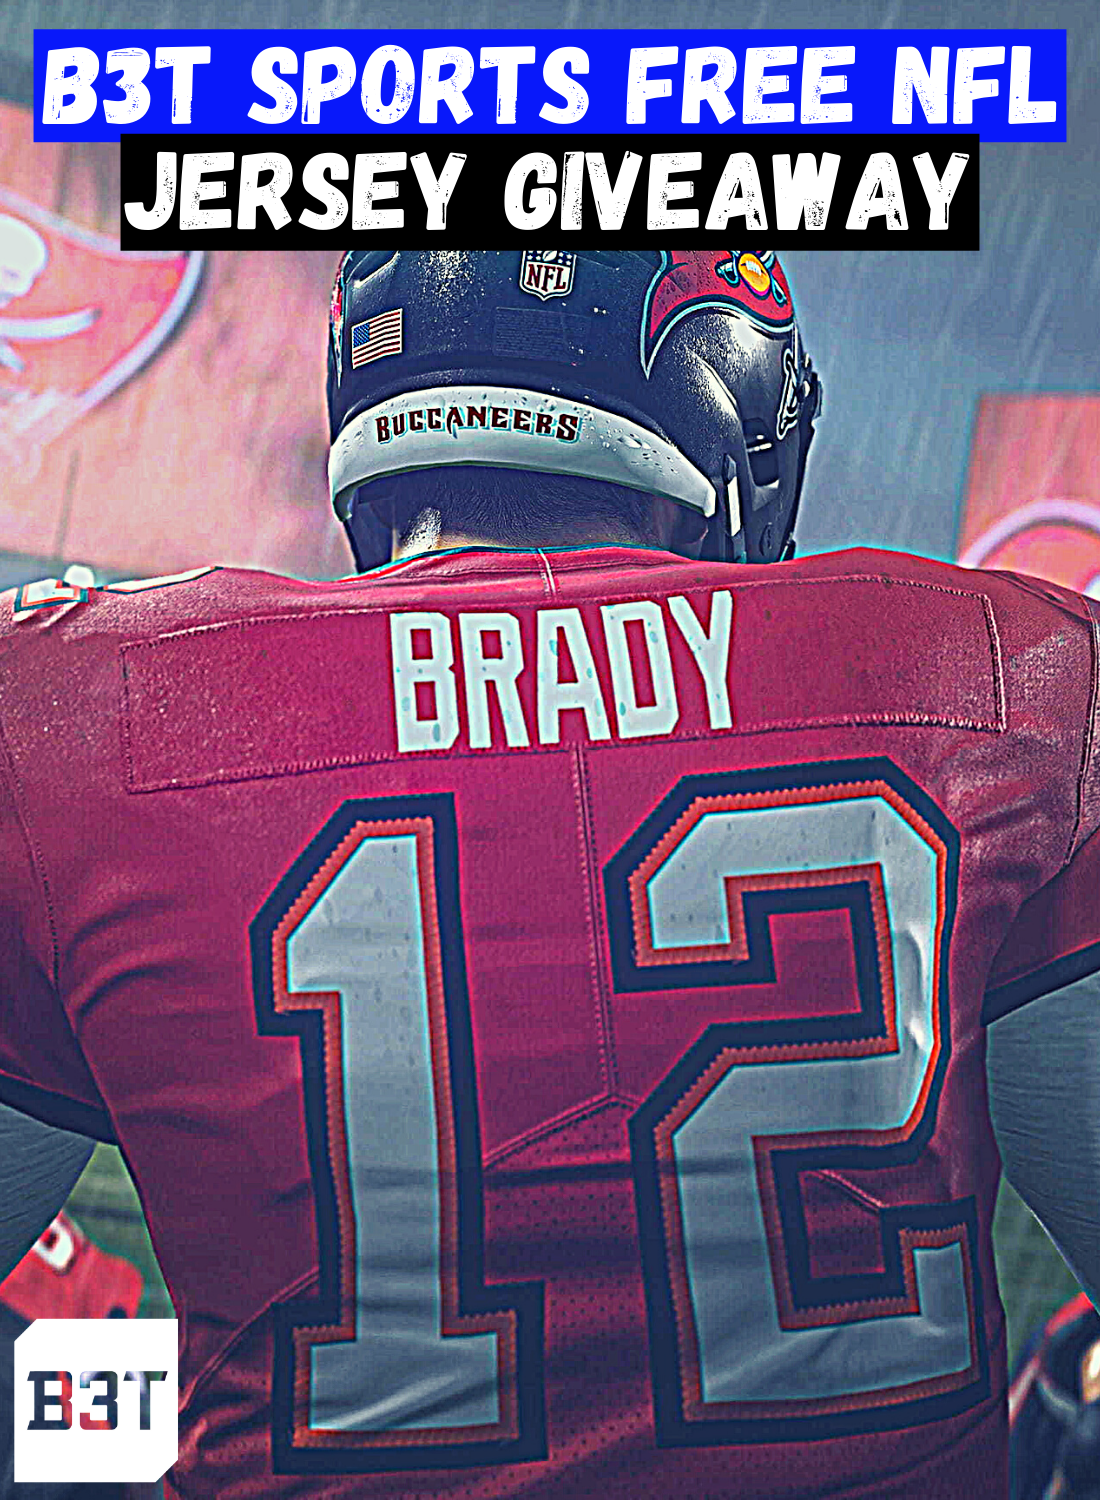 NFL Jersey Giveaway